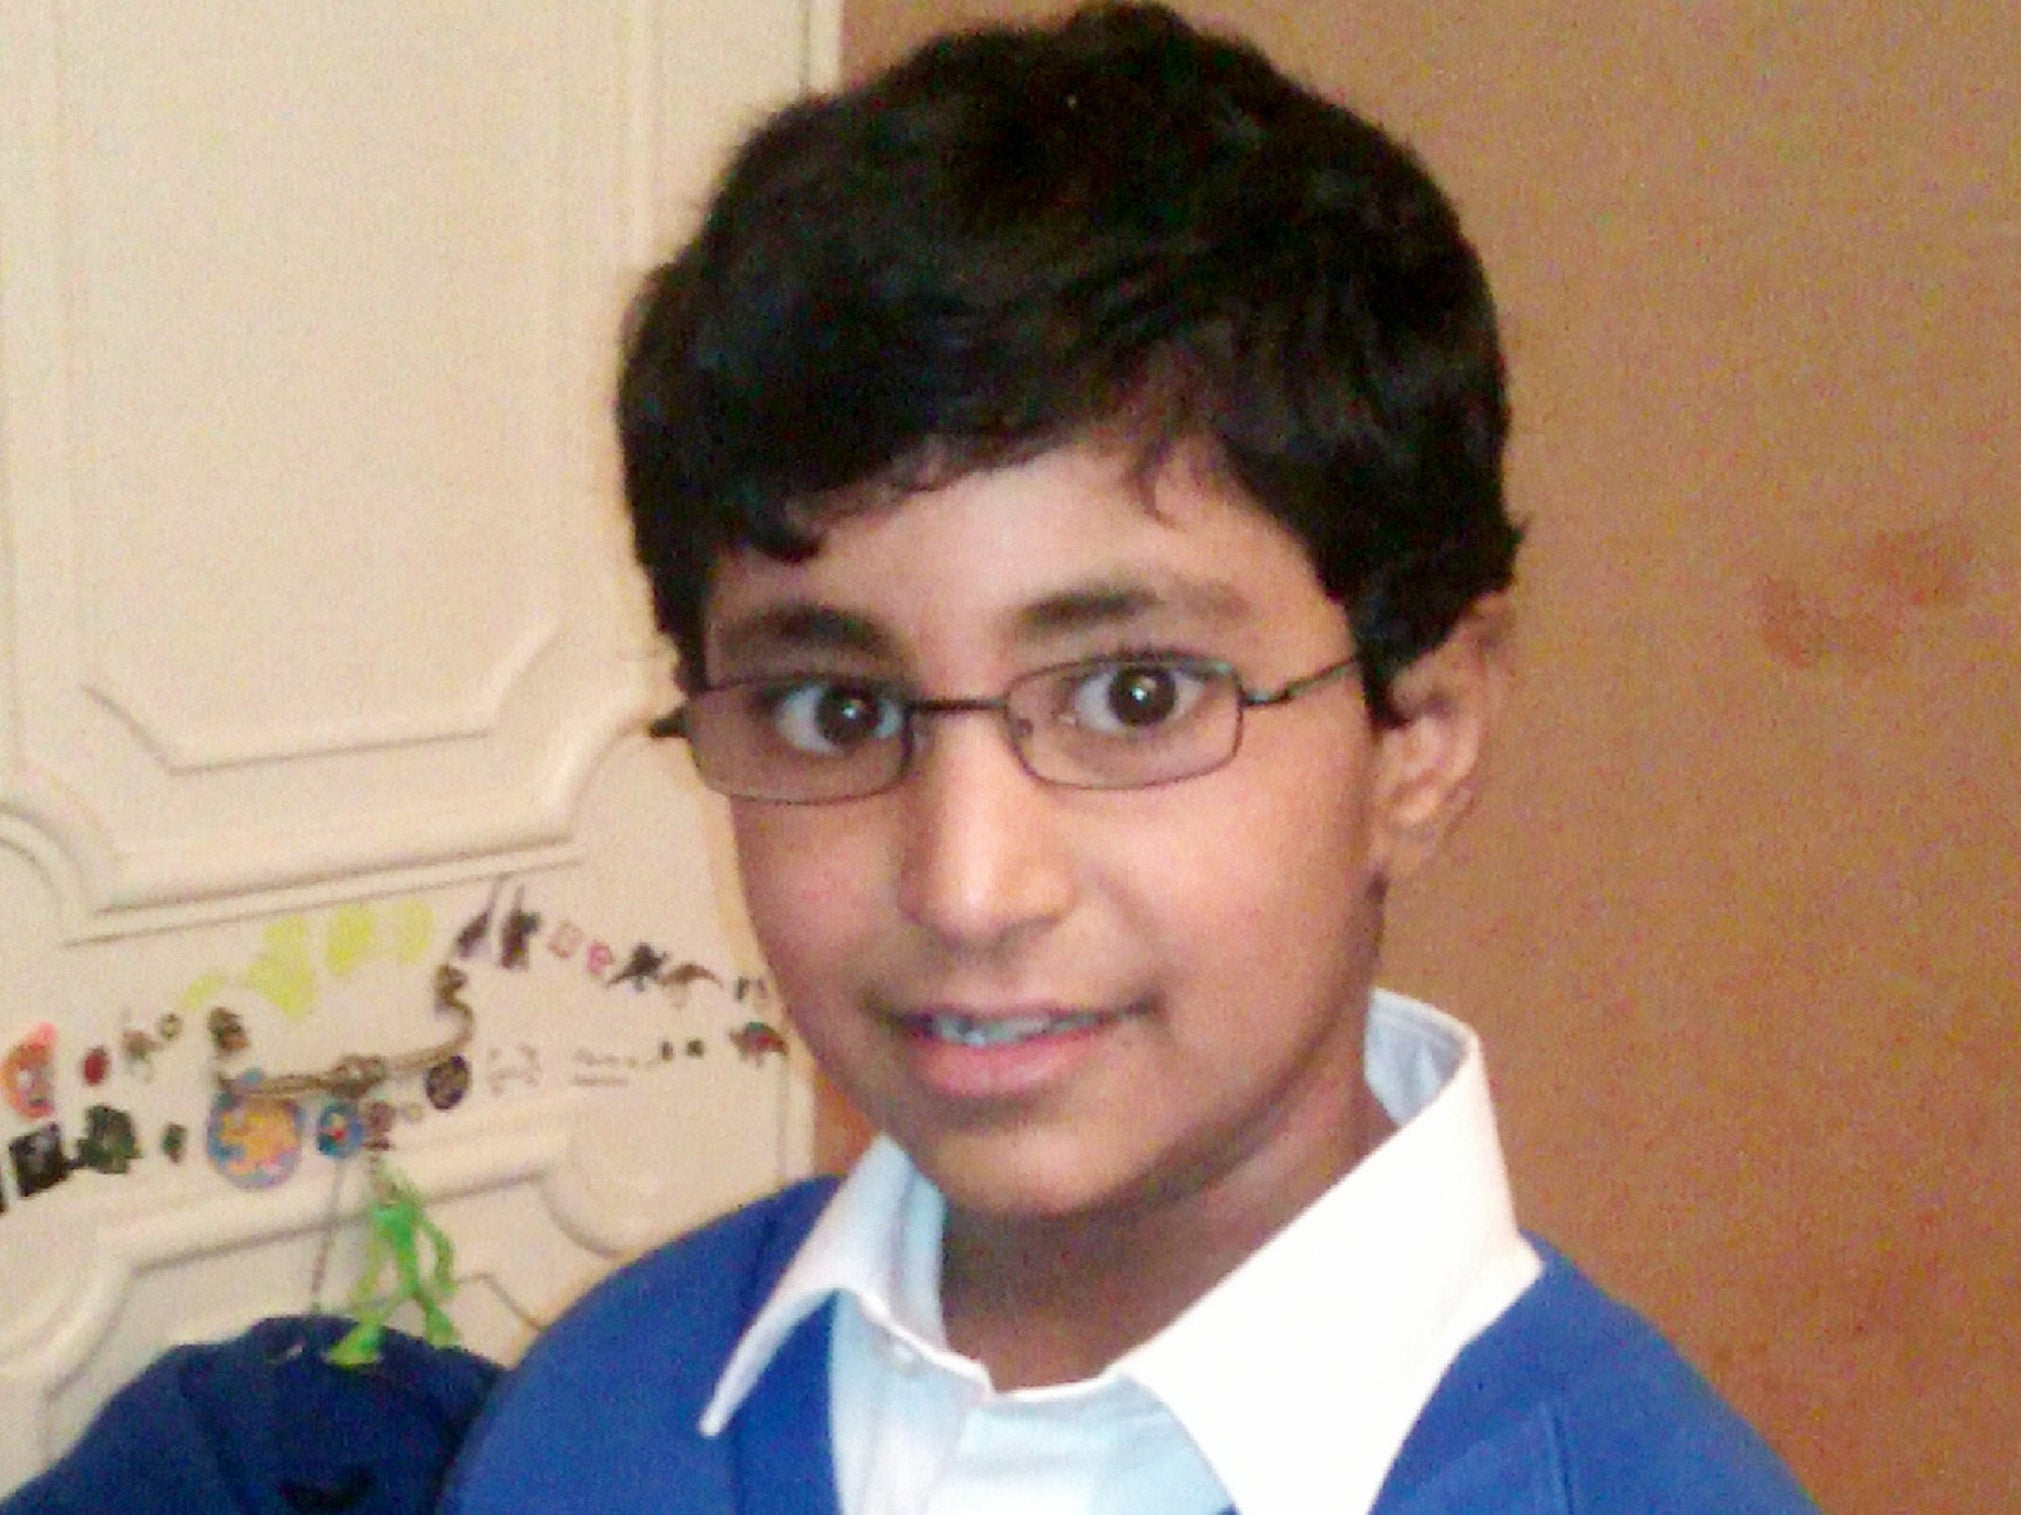 13-year-old boy dies of allergic reaction after having &apos;cheese thrown down his T-shirt&apos;, inquest hears